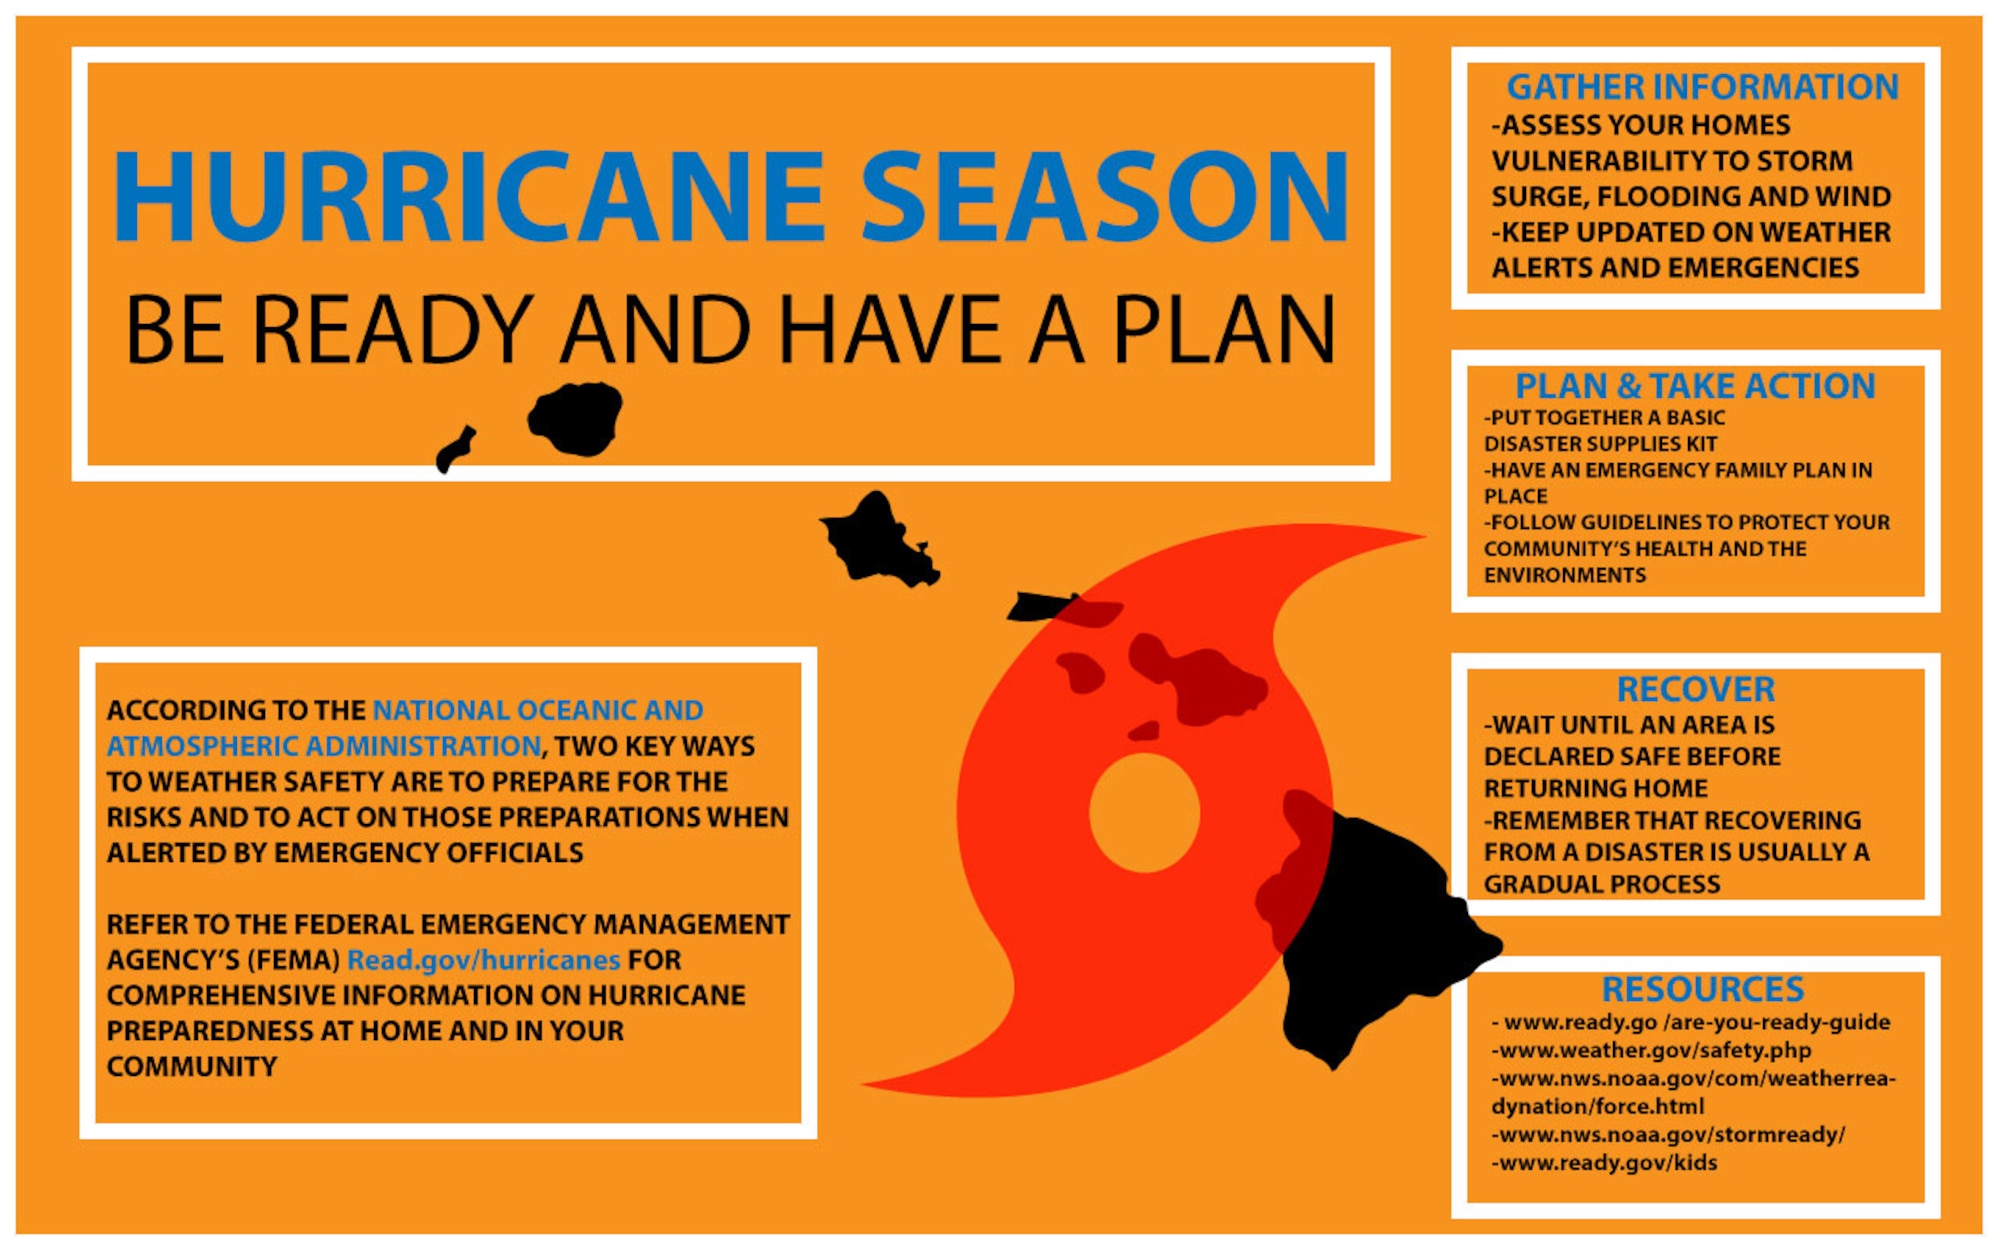 A hurricane season infographic explaining the information about preparing and reacting to a hurricane event created at Marine Corps Base Hawaii, July 27, 2018. According to the National Oceanic and Atmospheric Administration, two key ways to weather safety are to prepare for the risks and to act on those preparations when alerted by emergency officials. (Sgt. Jesus Sepulveda Torres)